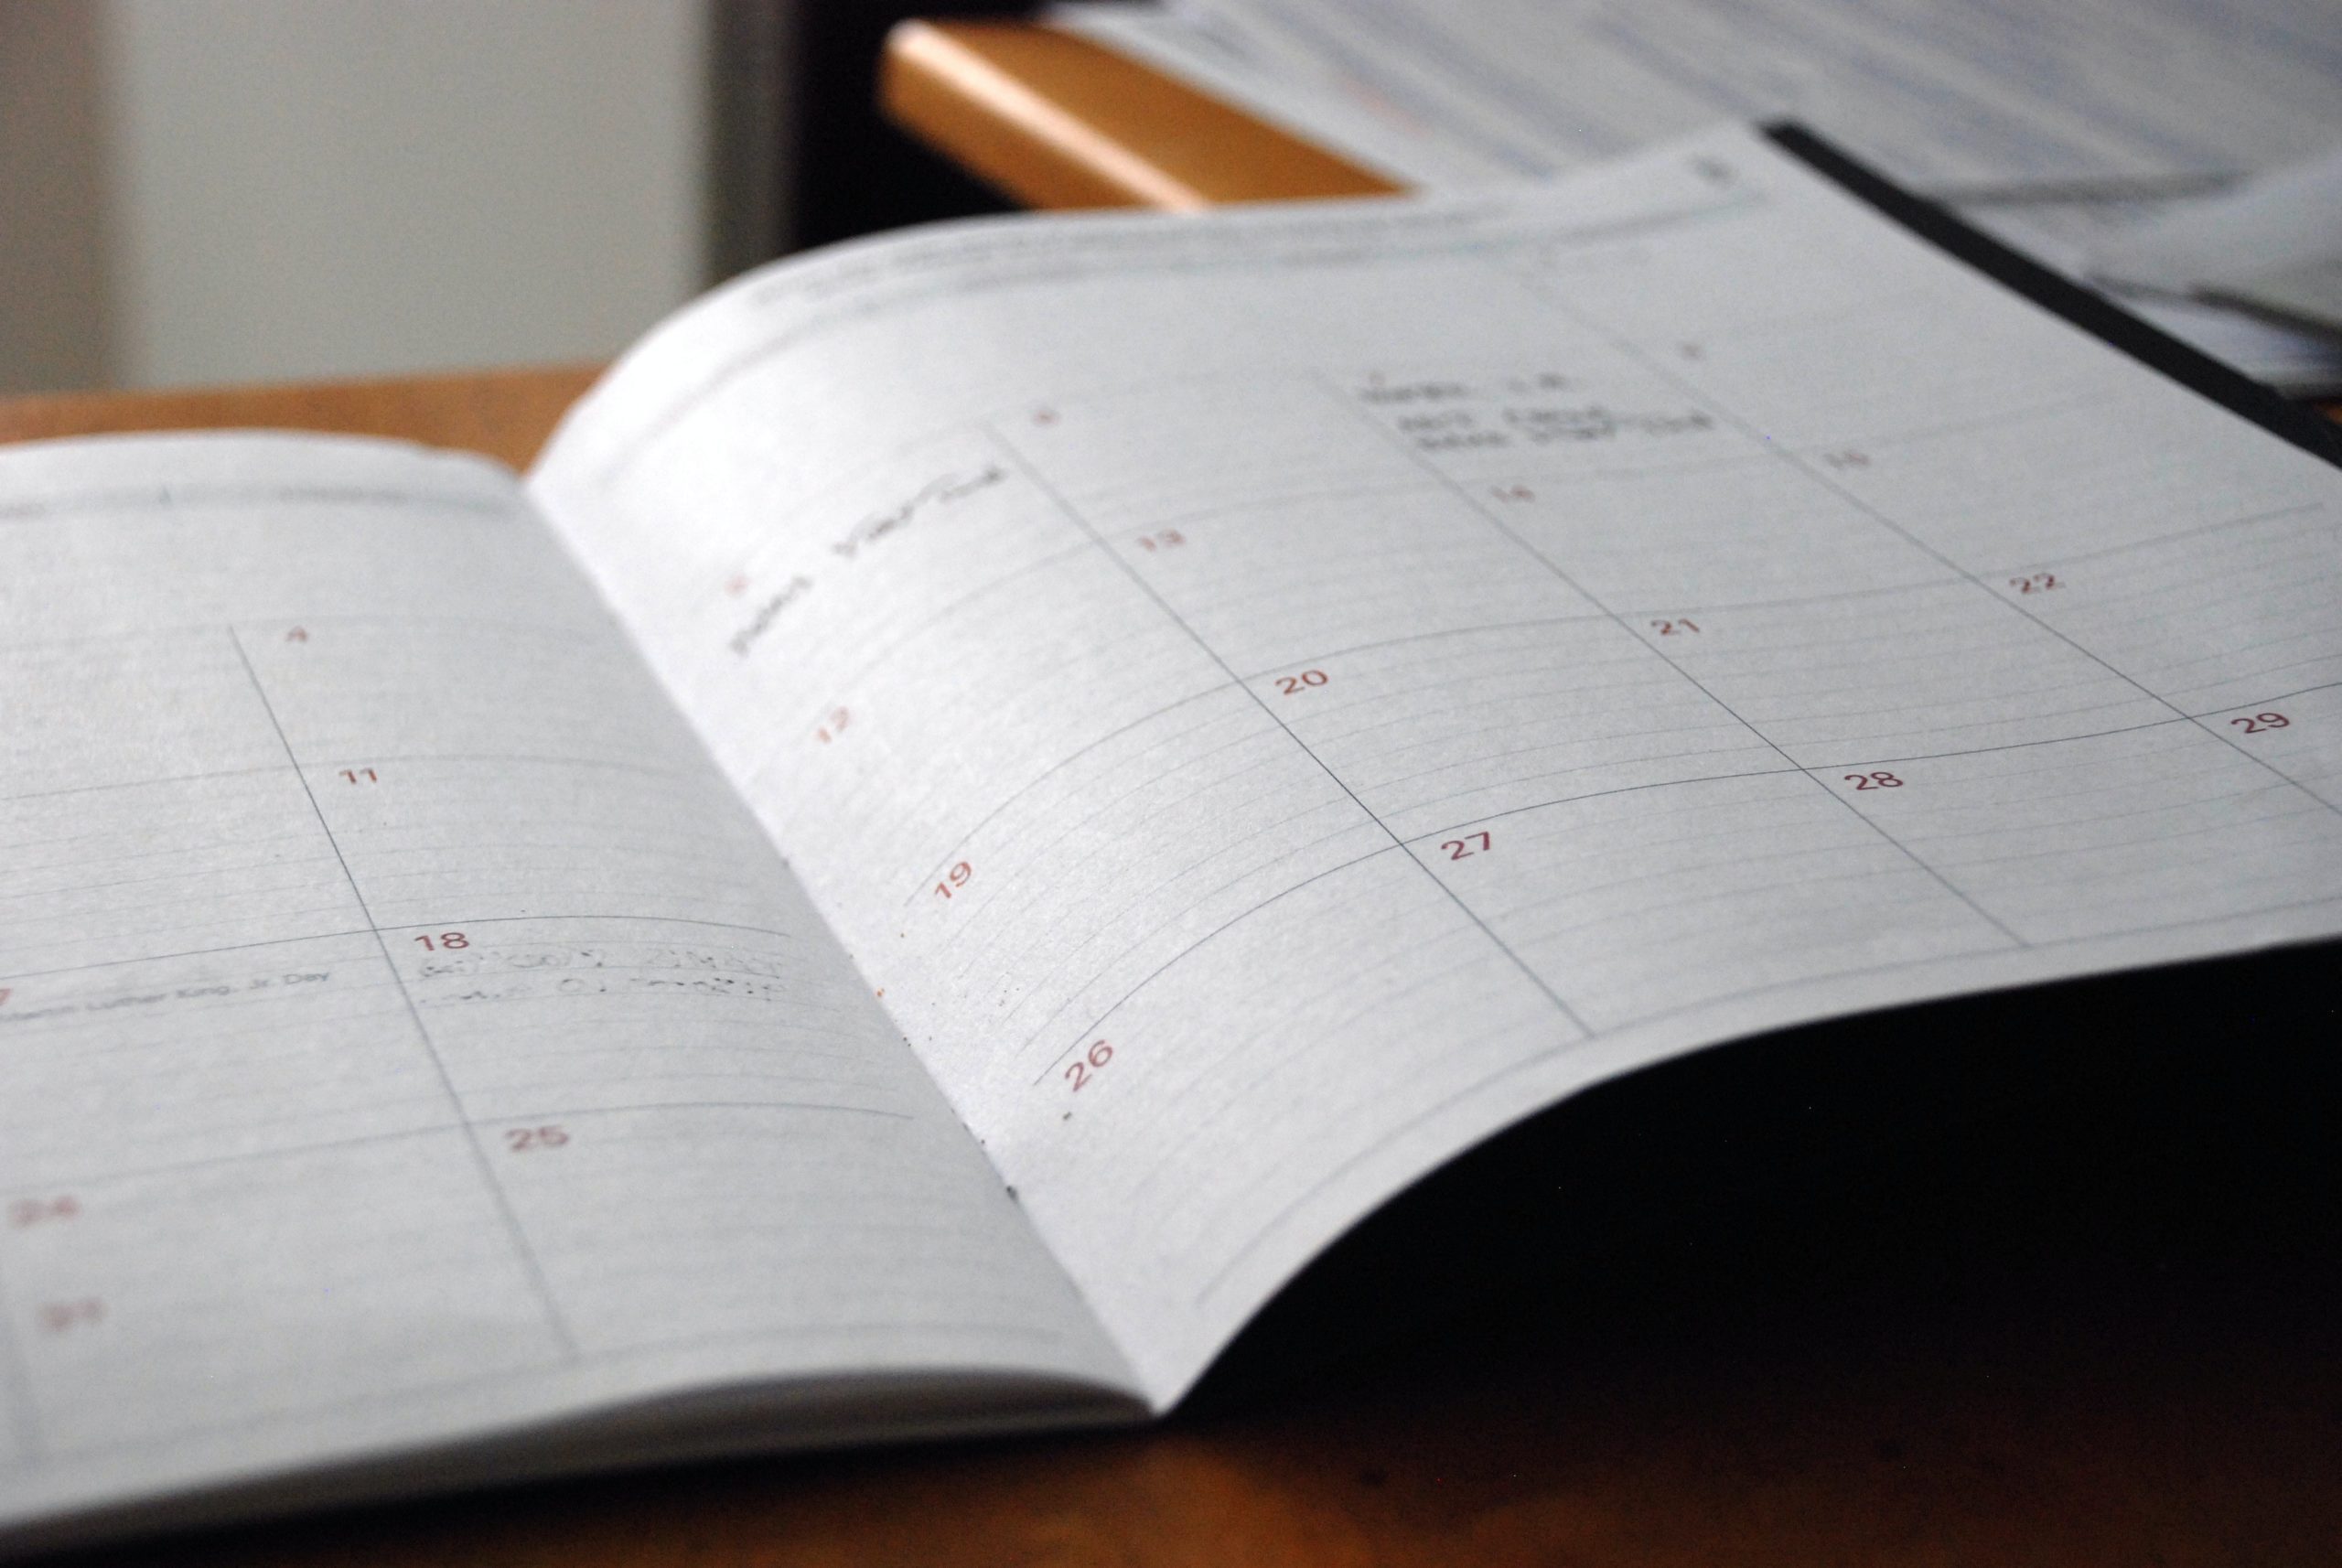 an image of an open notebook calendar with some items written in on a few dates